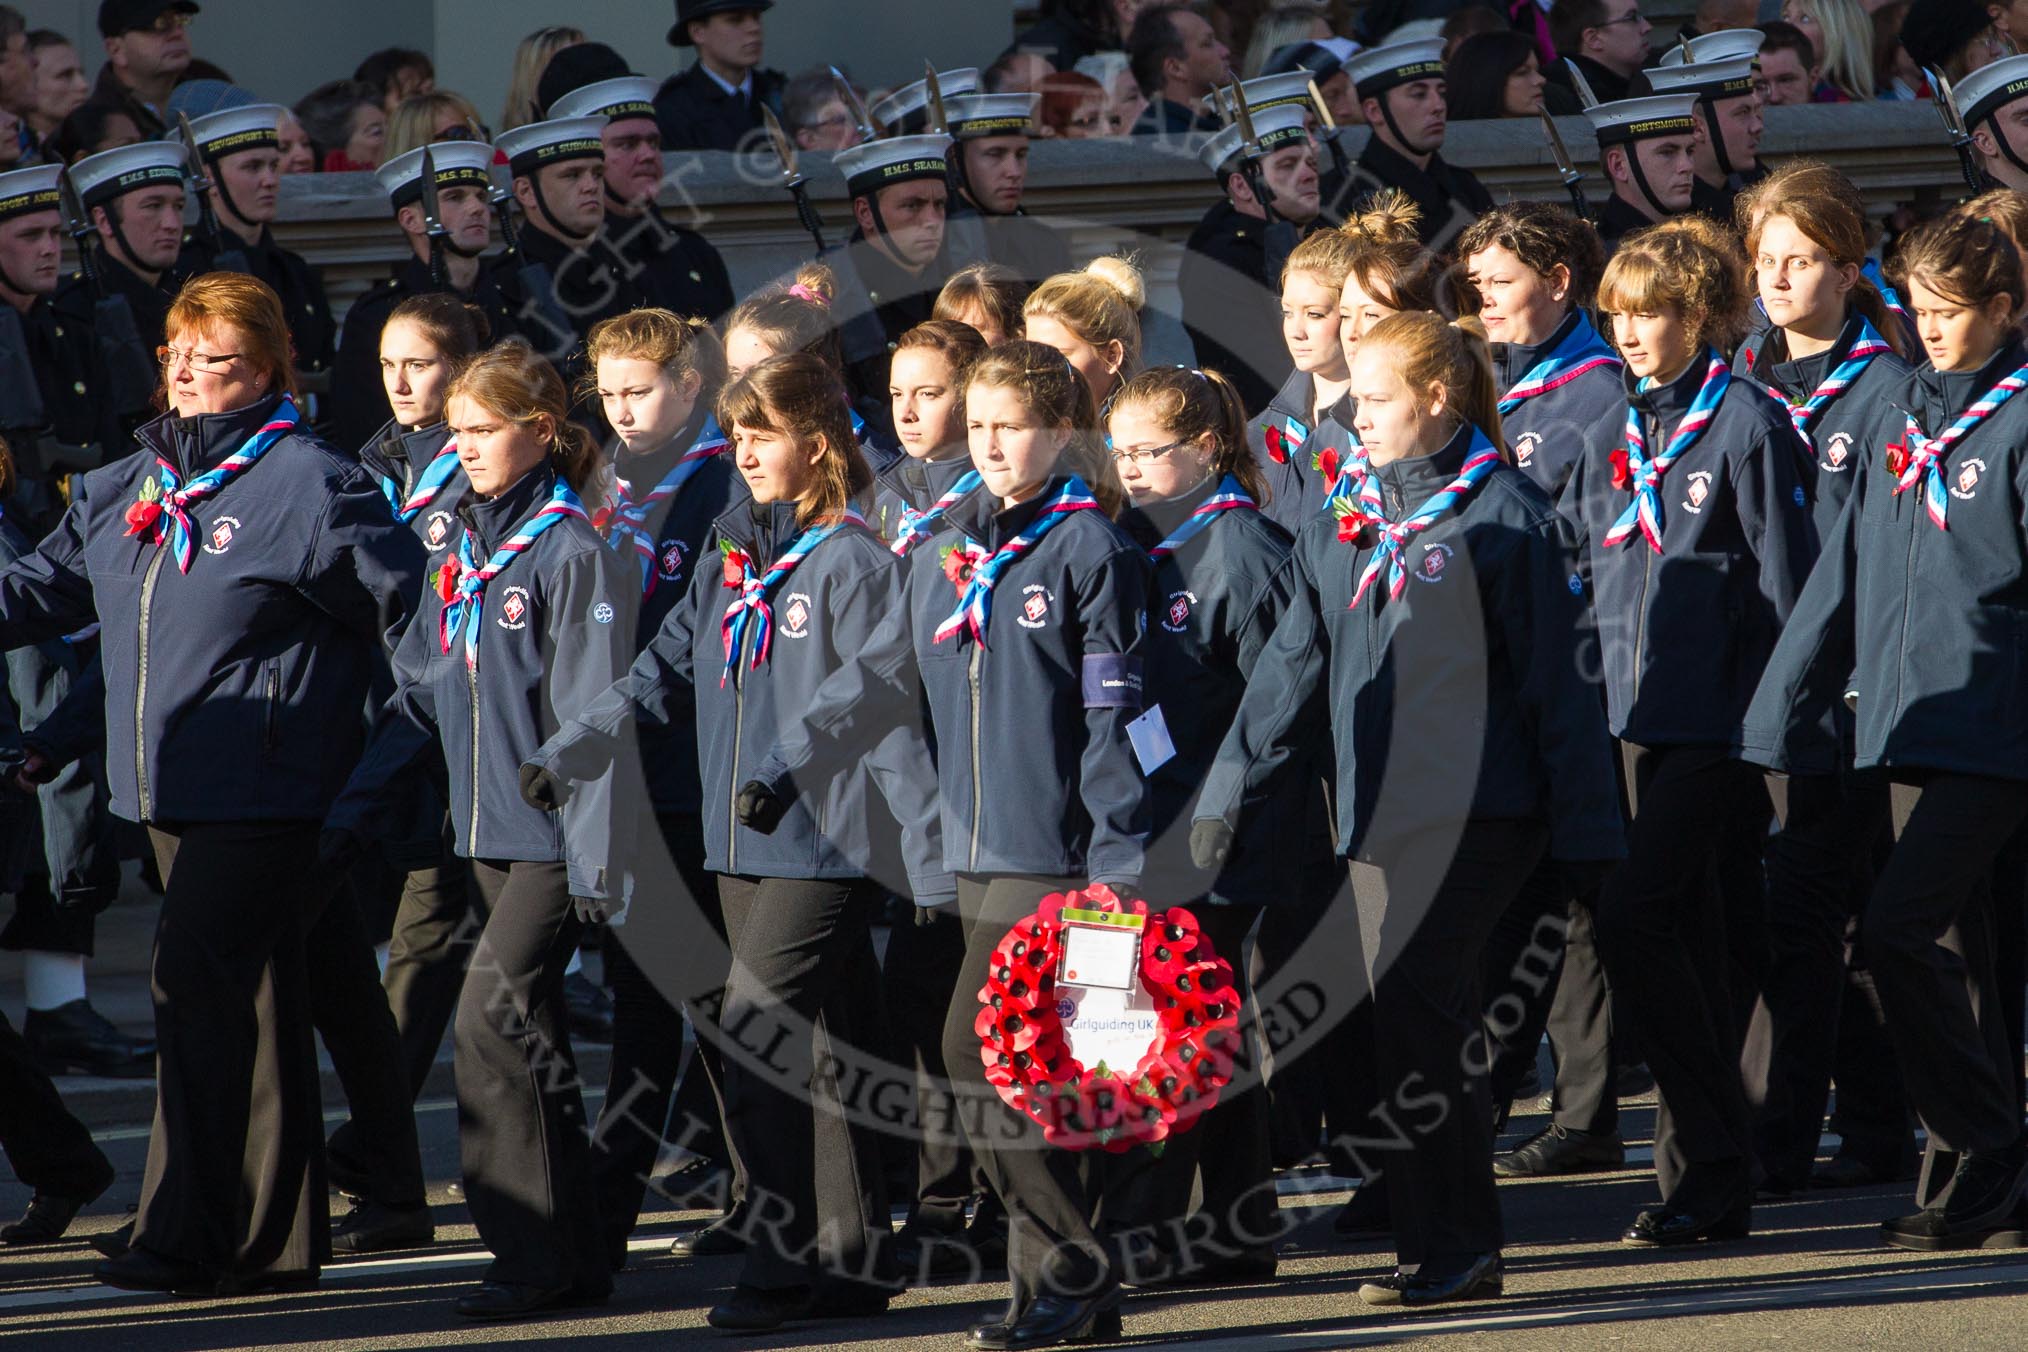 Remembrance Sunday 2012 Cenotaph March Past: Group M48 - Girlguiding London & South East England..
Whitehall, Cenotaph,
London SW1,

United Kingdom,
on 11 November 2012 at 12:15, image #1715